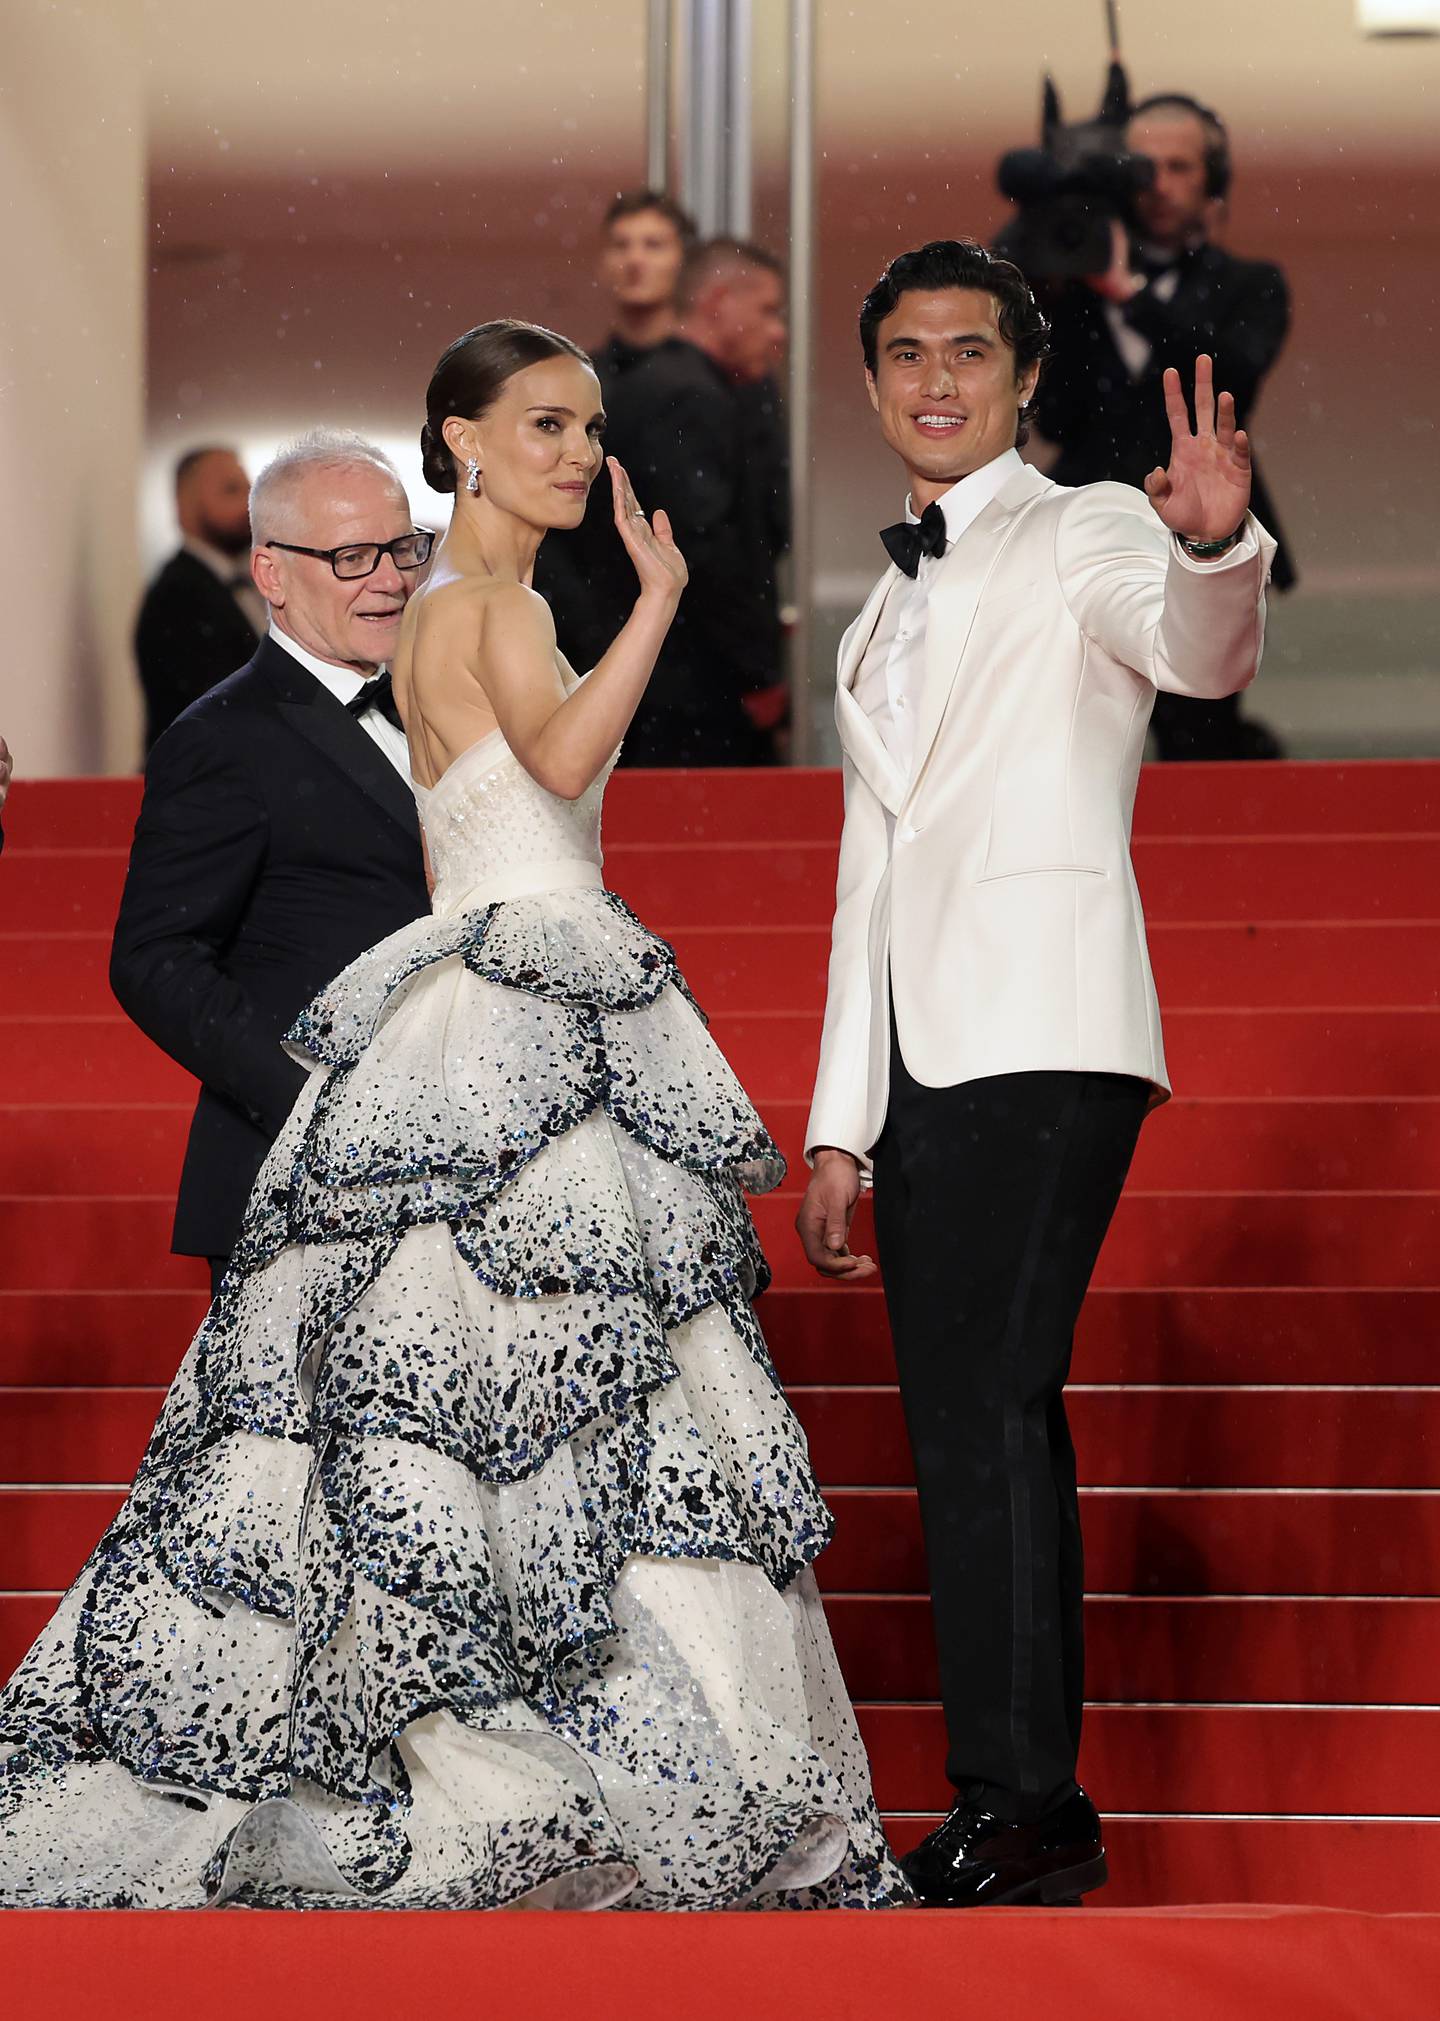 Cannes film festival fashion: The best red carpet looks so far – The ...